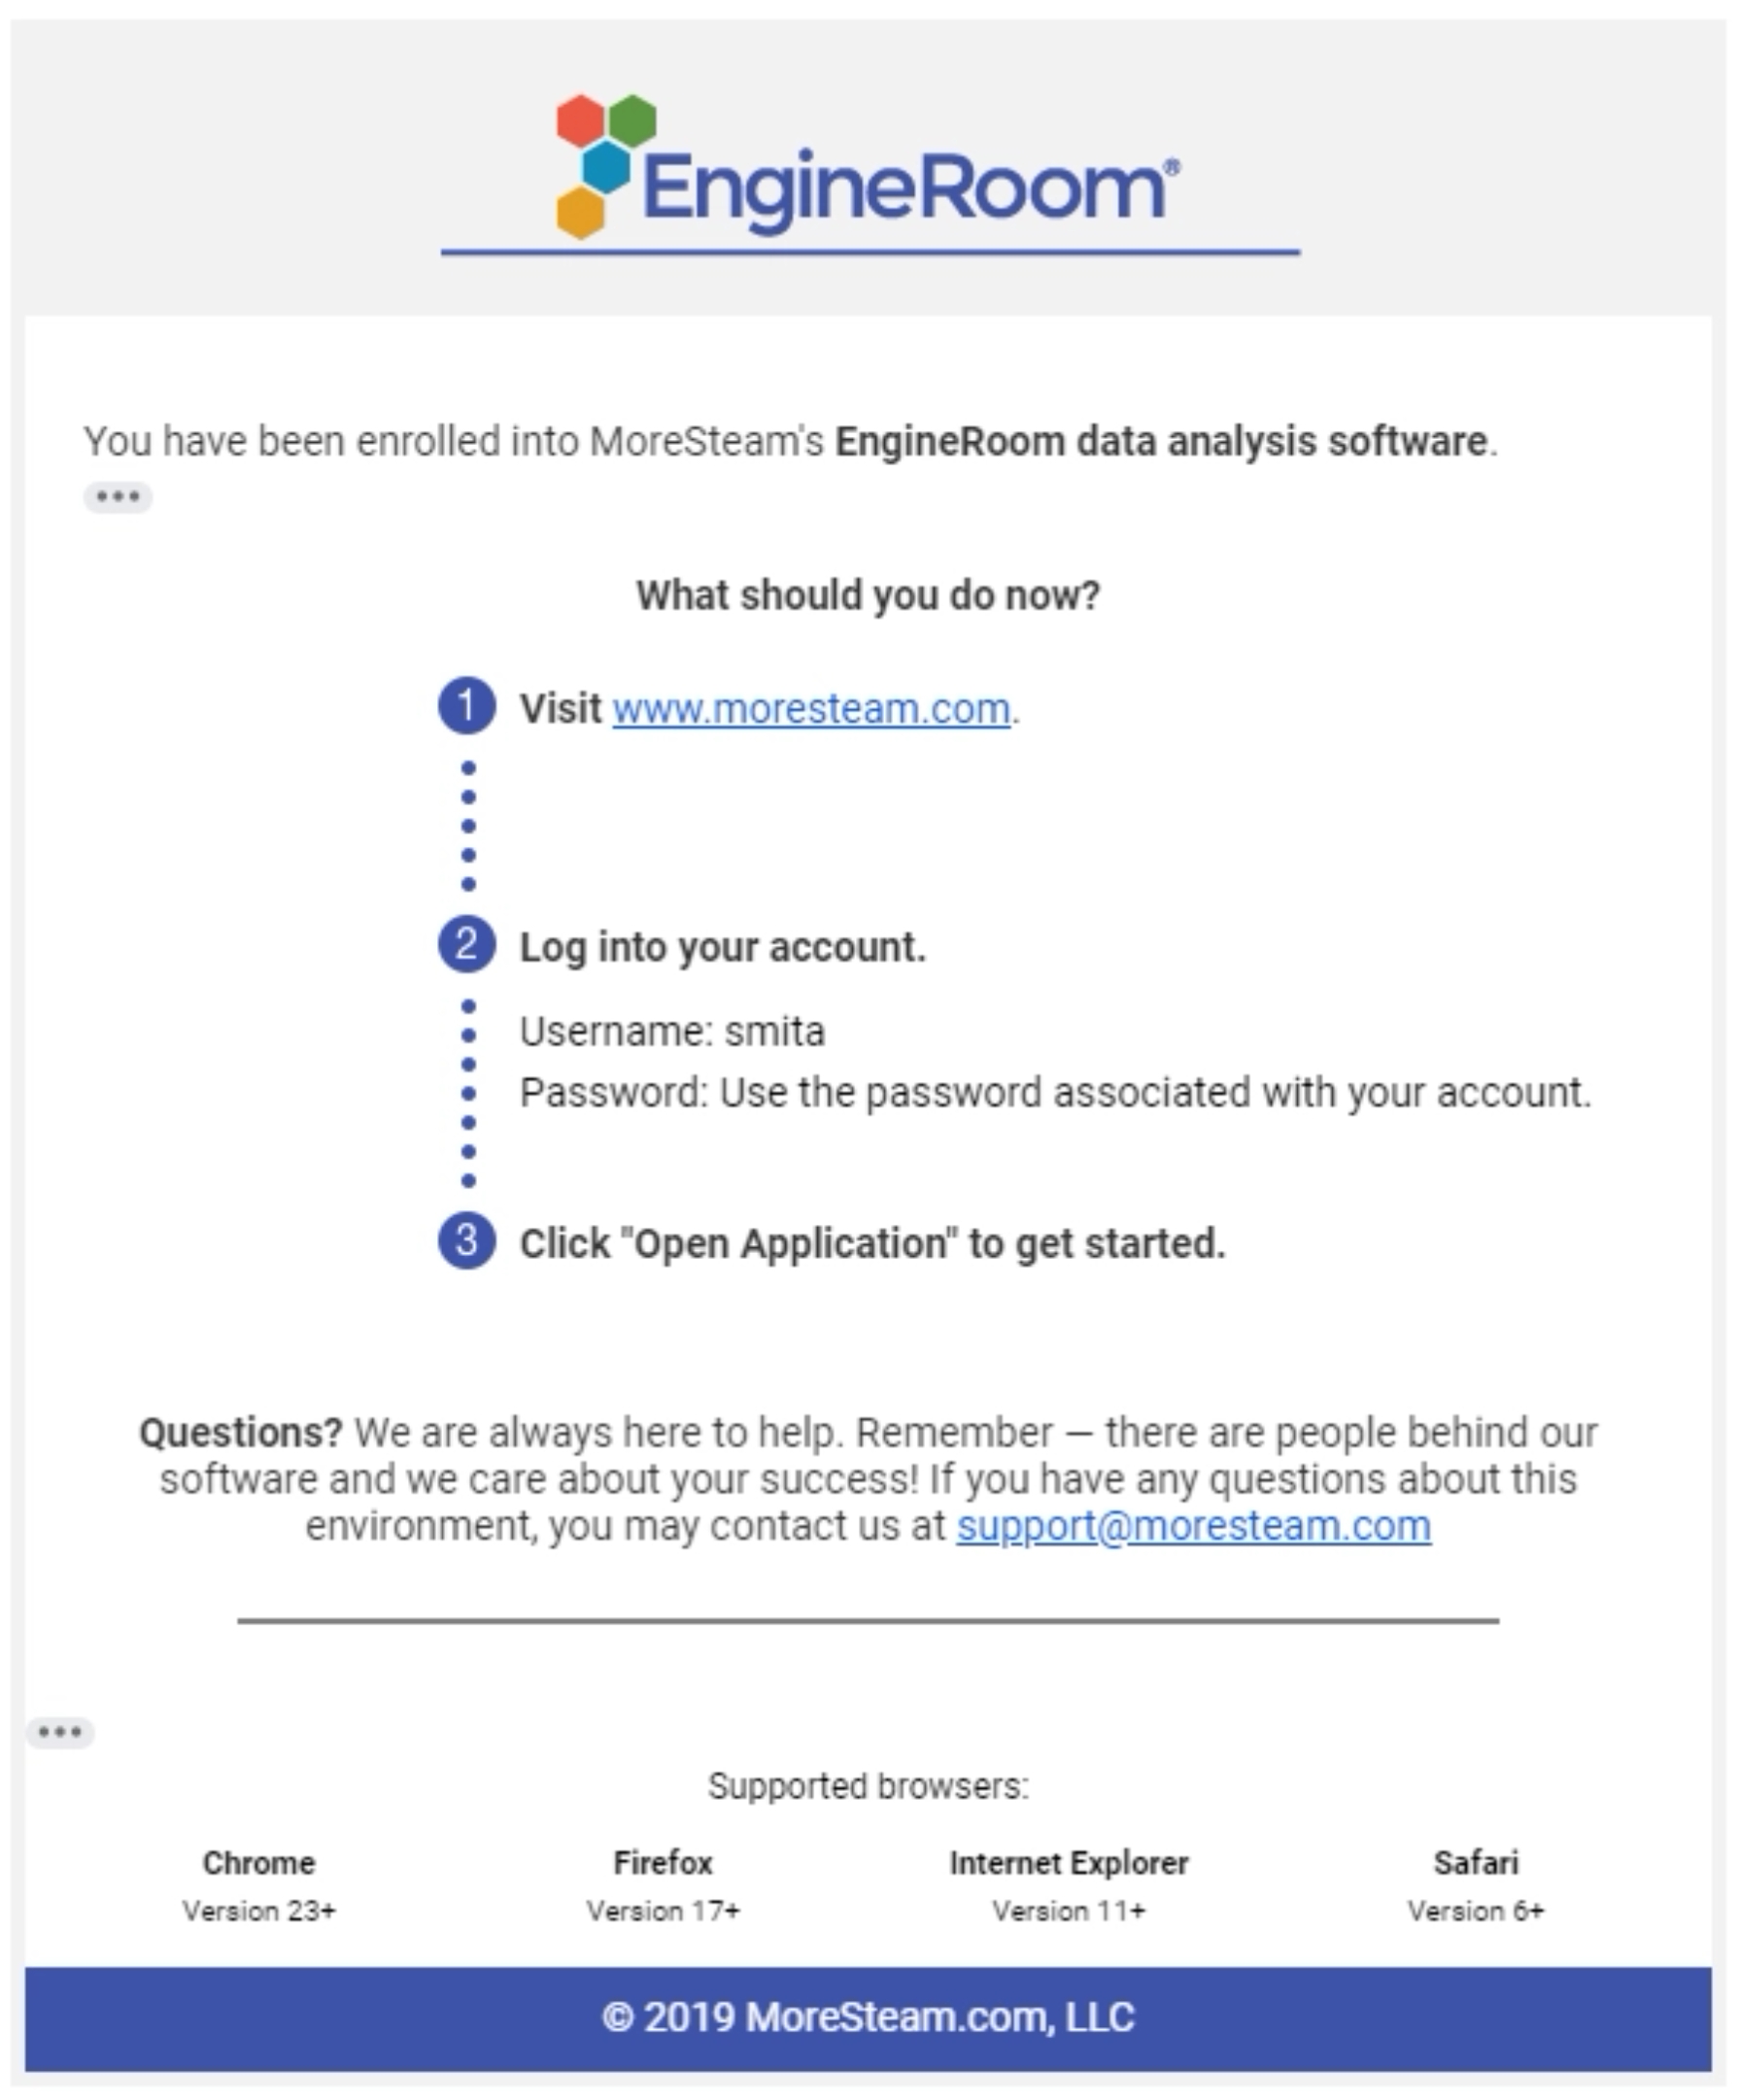 Welcome email sent to user after successfully signing up for EngineRoom